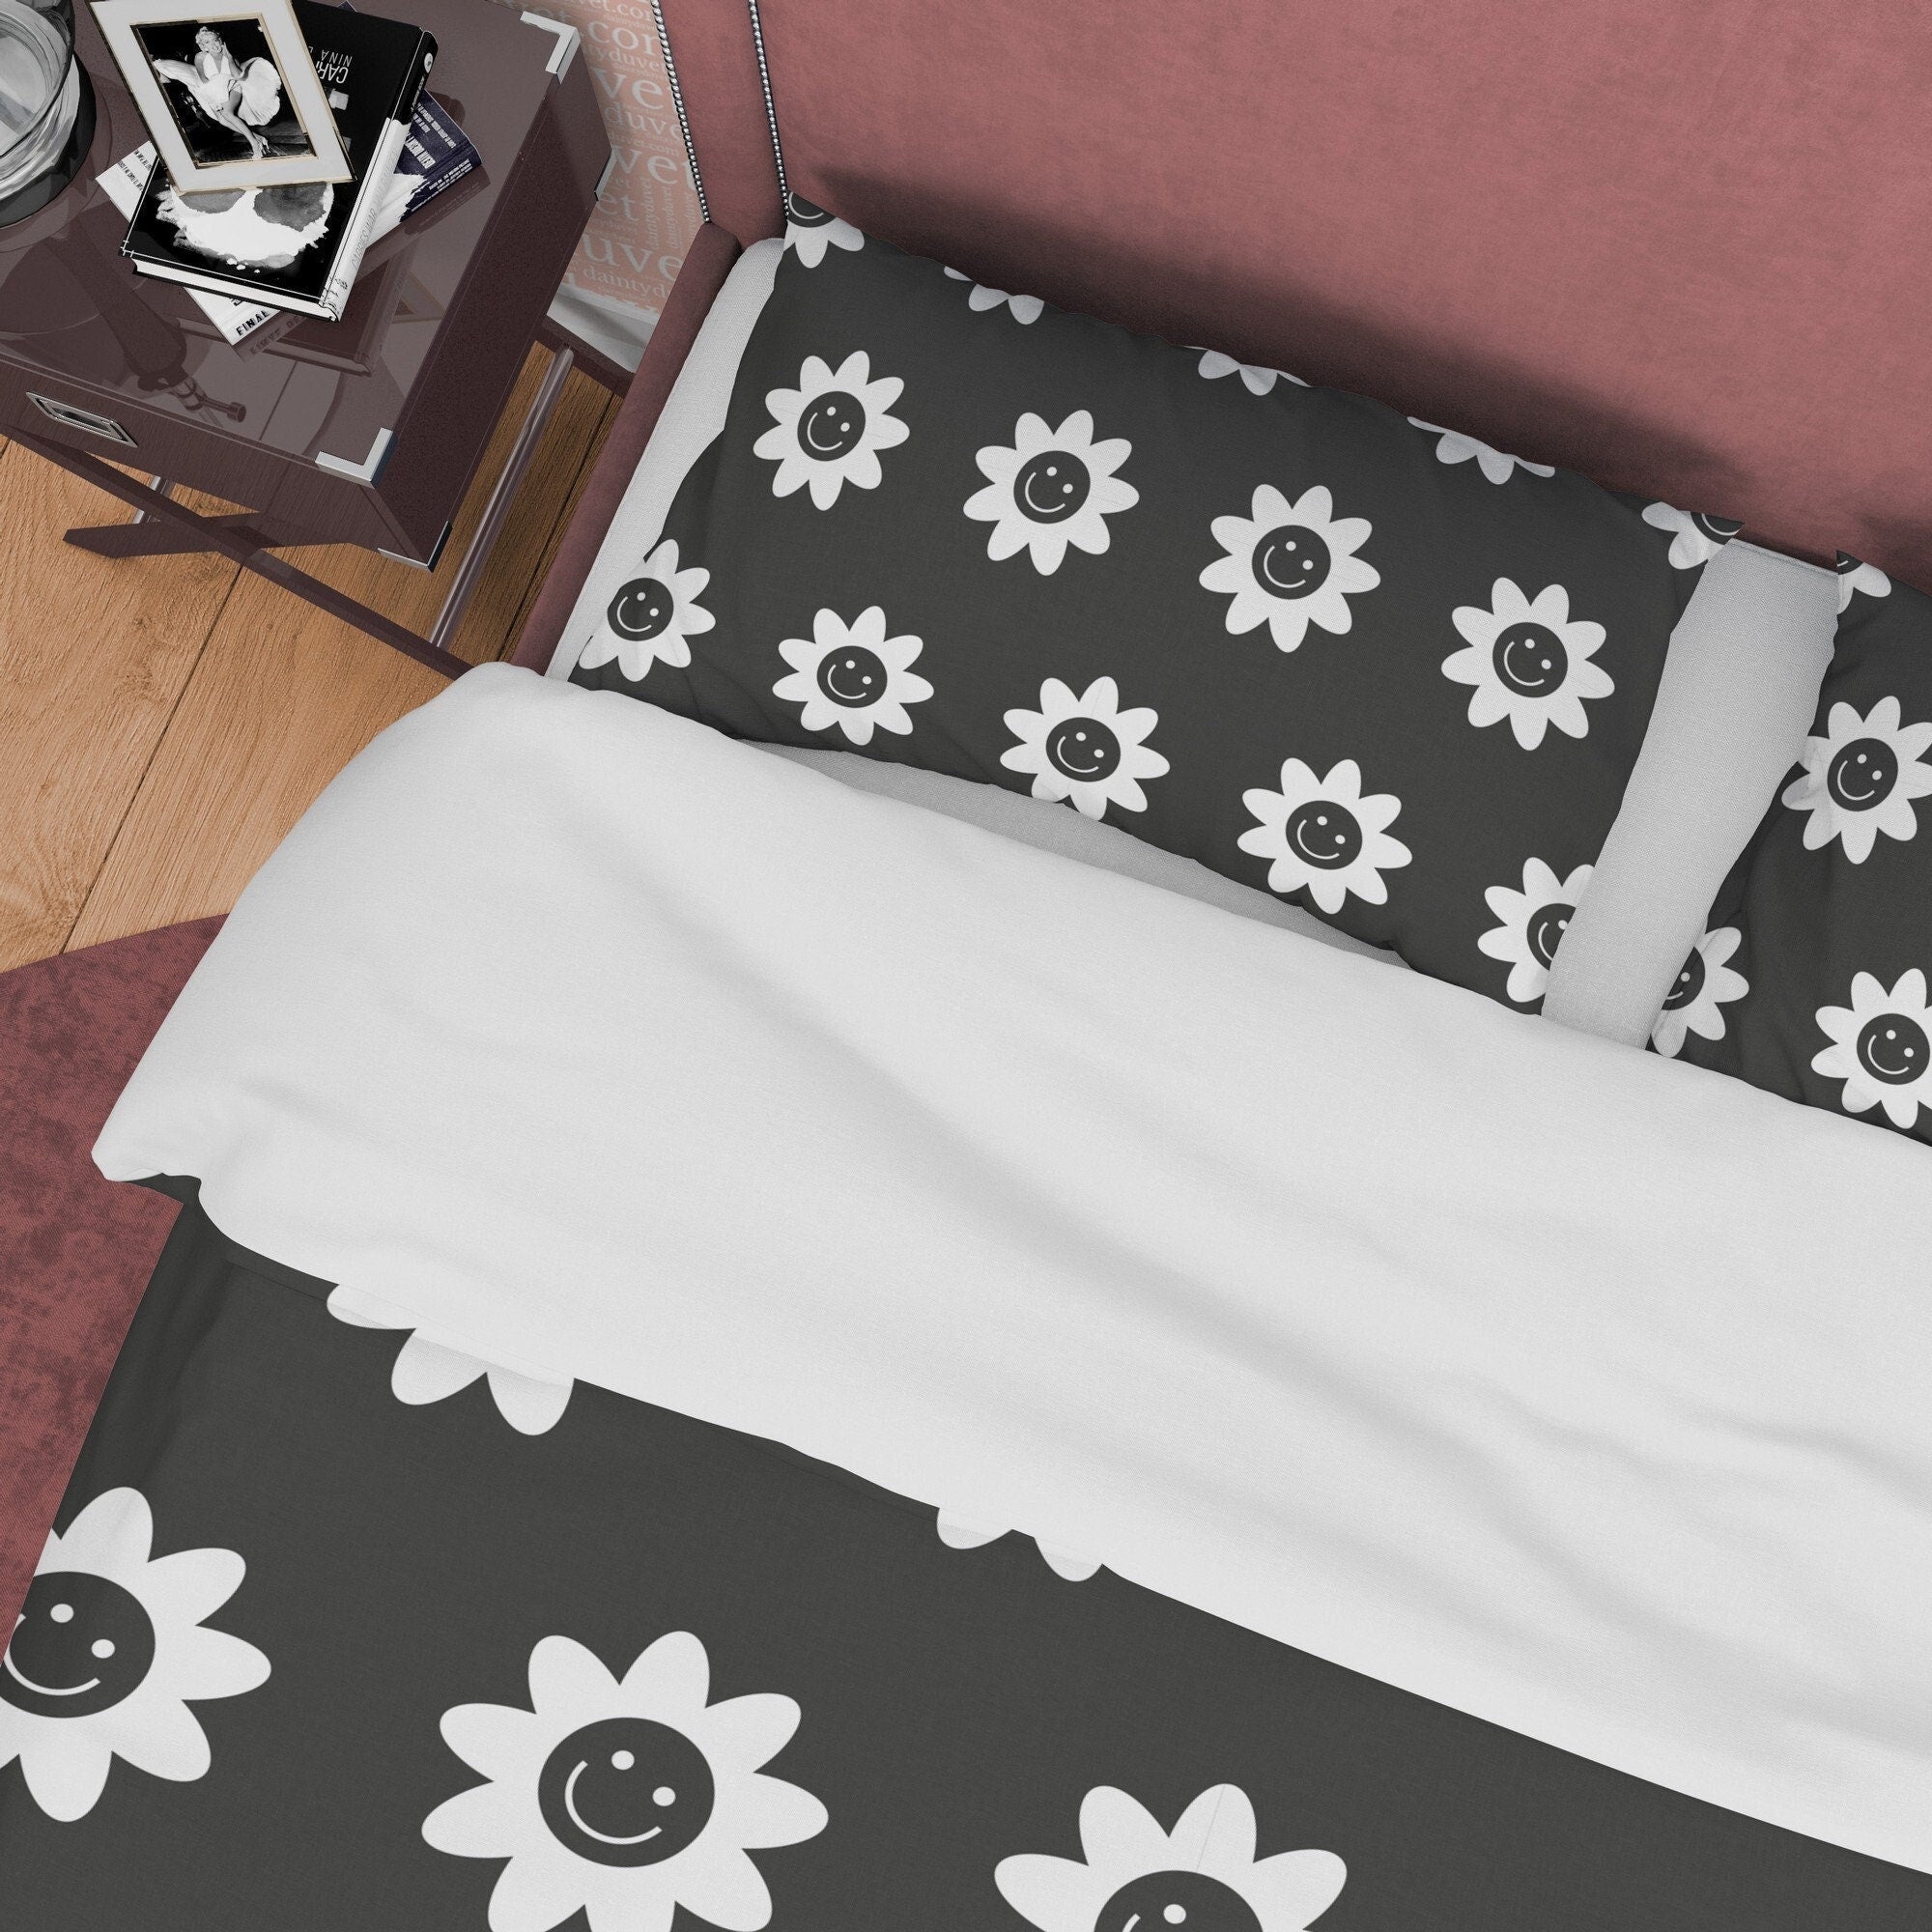 Black and White Cotton Duvet Cover Set Happy Flower Blanket Cover, Retro Printed Bedding Set, Groovy Bedspread, 90s Nostalgia Quilt Cover